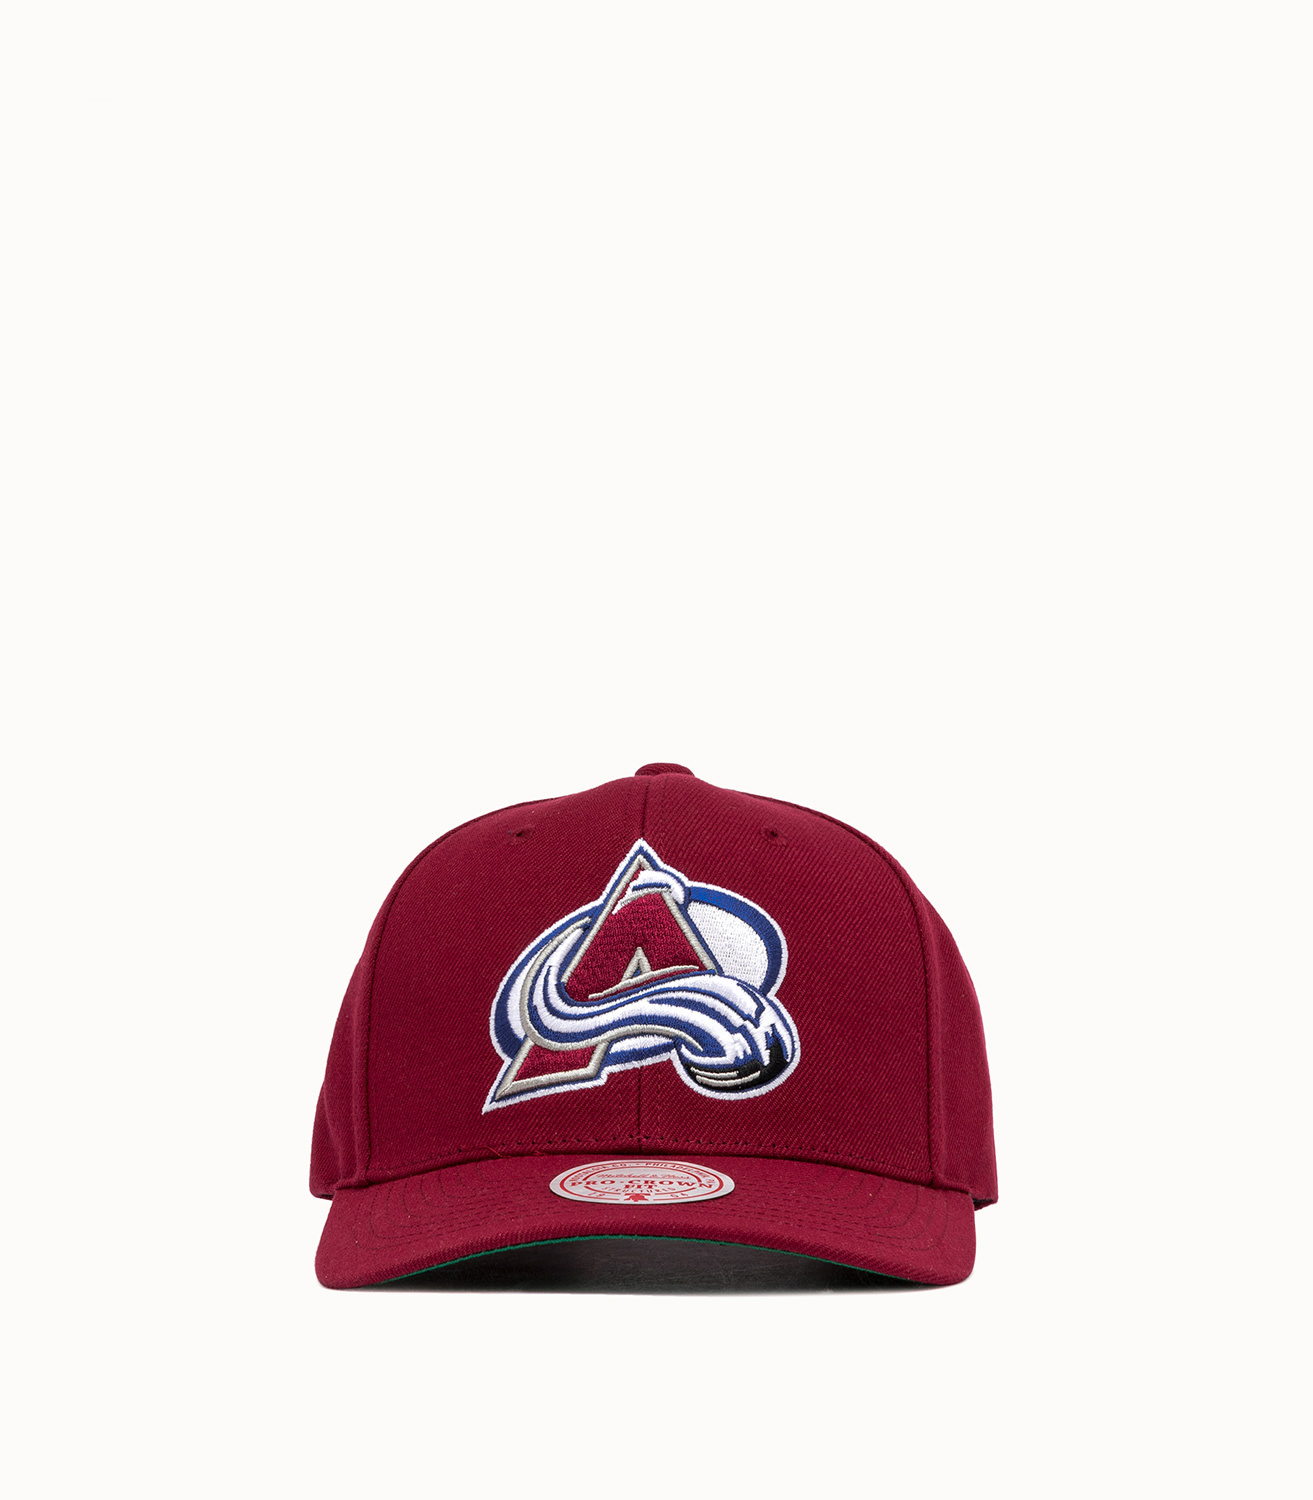 Men's Colorado Avalanche Mitchell & Ness Burgundy Vintage Fitted Hat